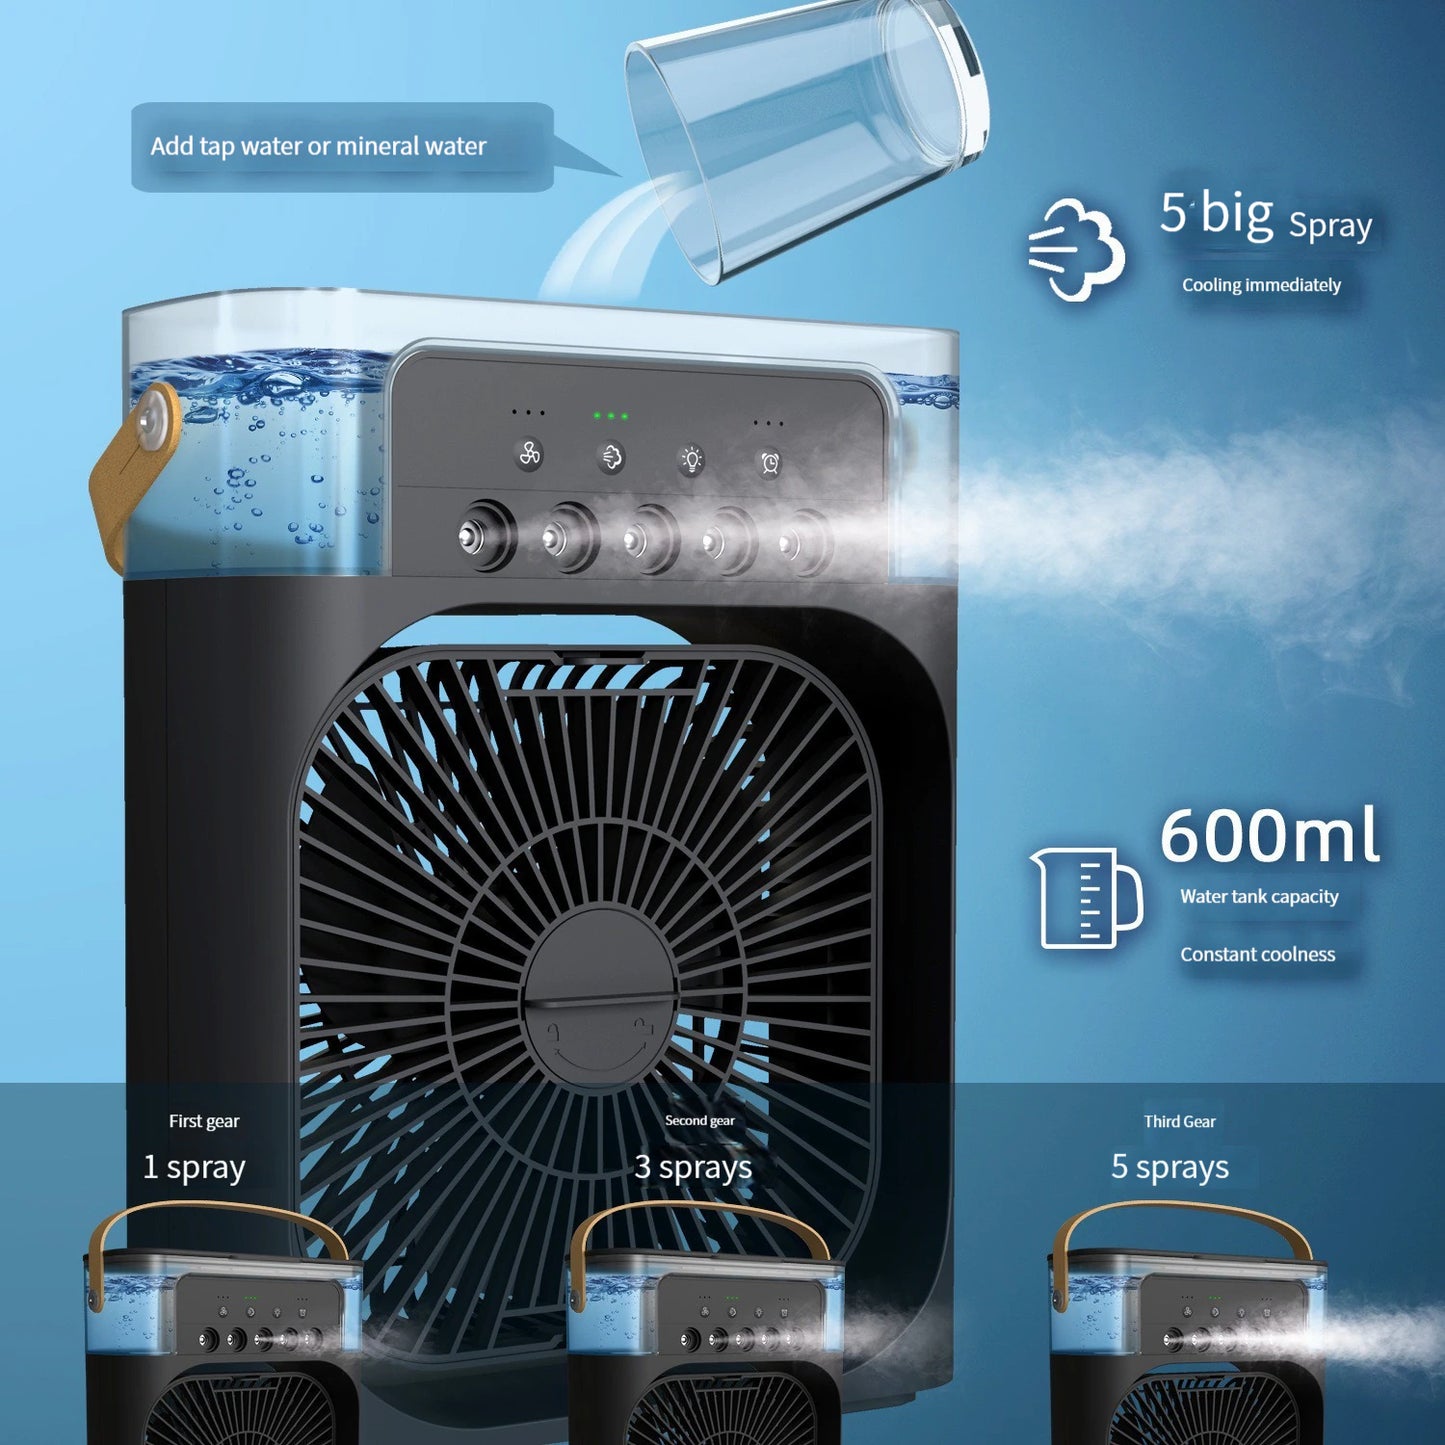 "ChillMate: Portable 3-Speed Air Cooler & Humidifier"